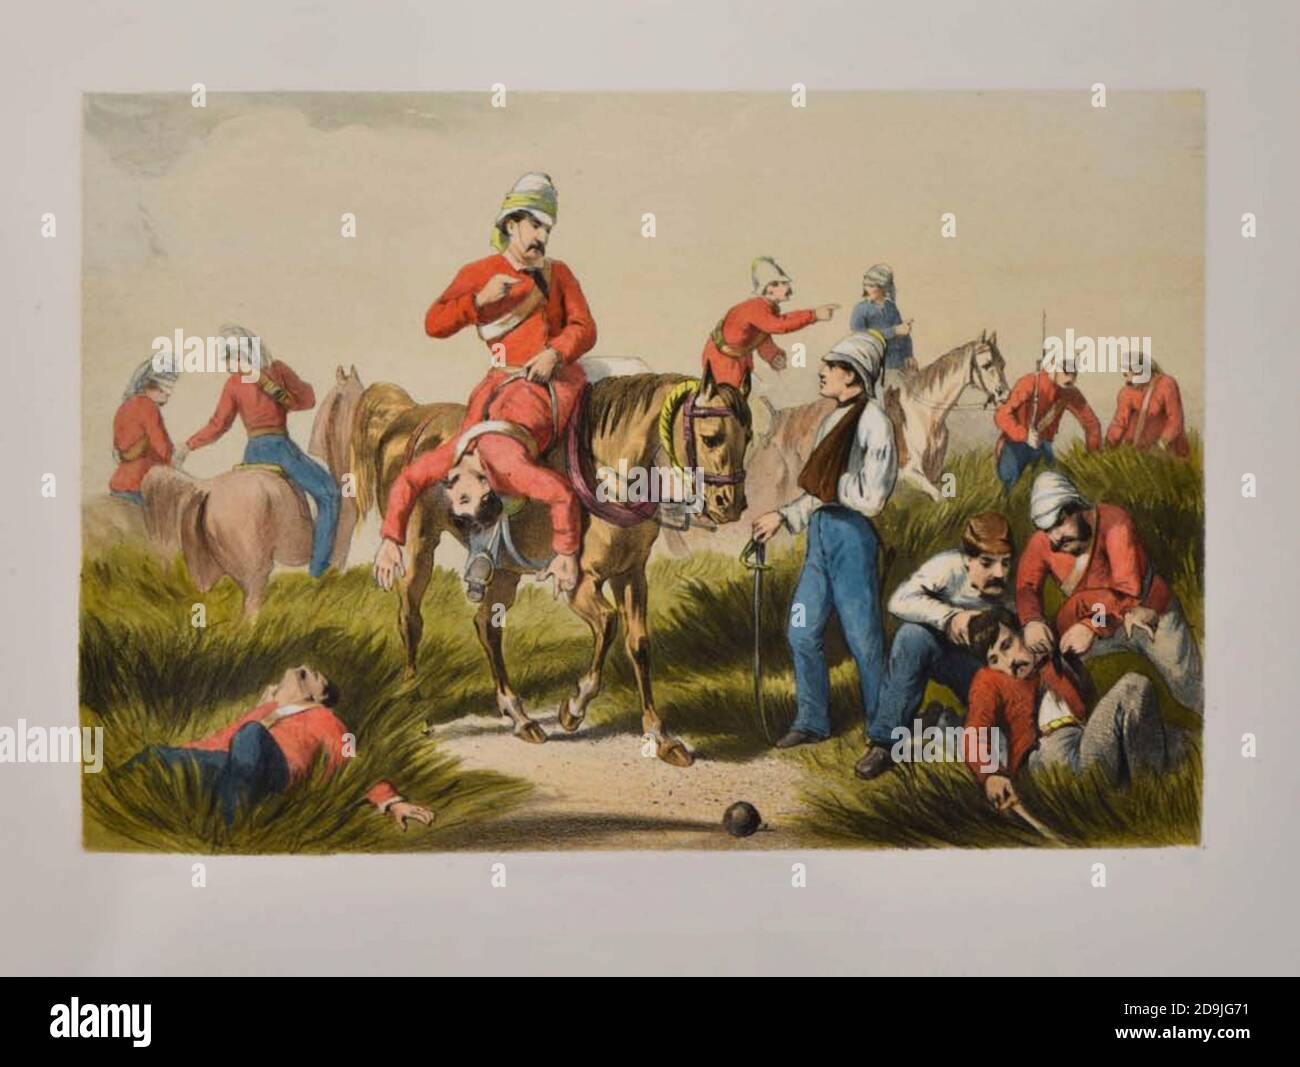 Search for the Wounded Lithograph from the book Campaign in India 1857-58 Illustrating the military operations before Delhi ; 26 Hand coloured Lithographed plates. by George Francklin Atkinson Published by Day & Son Lithographers to the Queen in 1859 Stock Photo